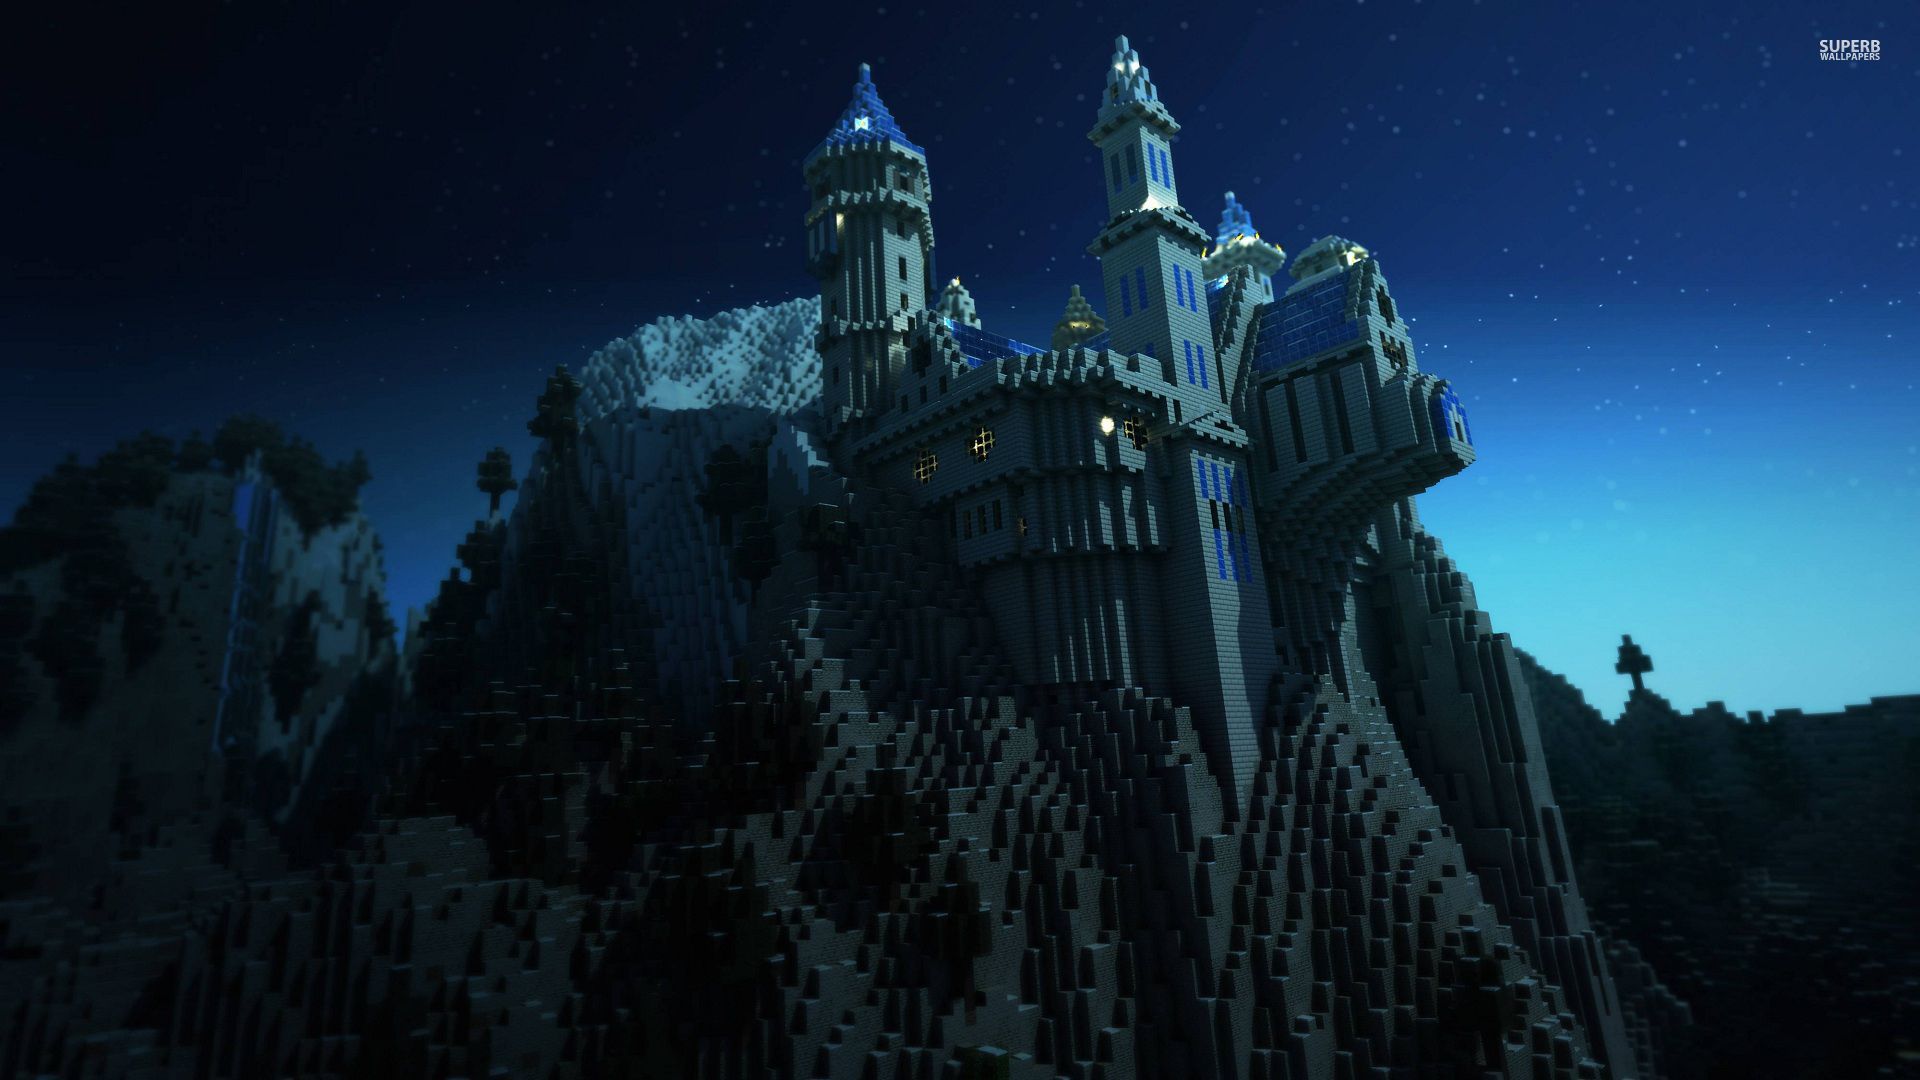 Castle on a cliff in minecraft 51748 1920x1080